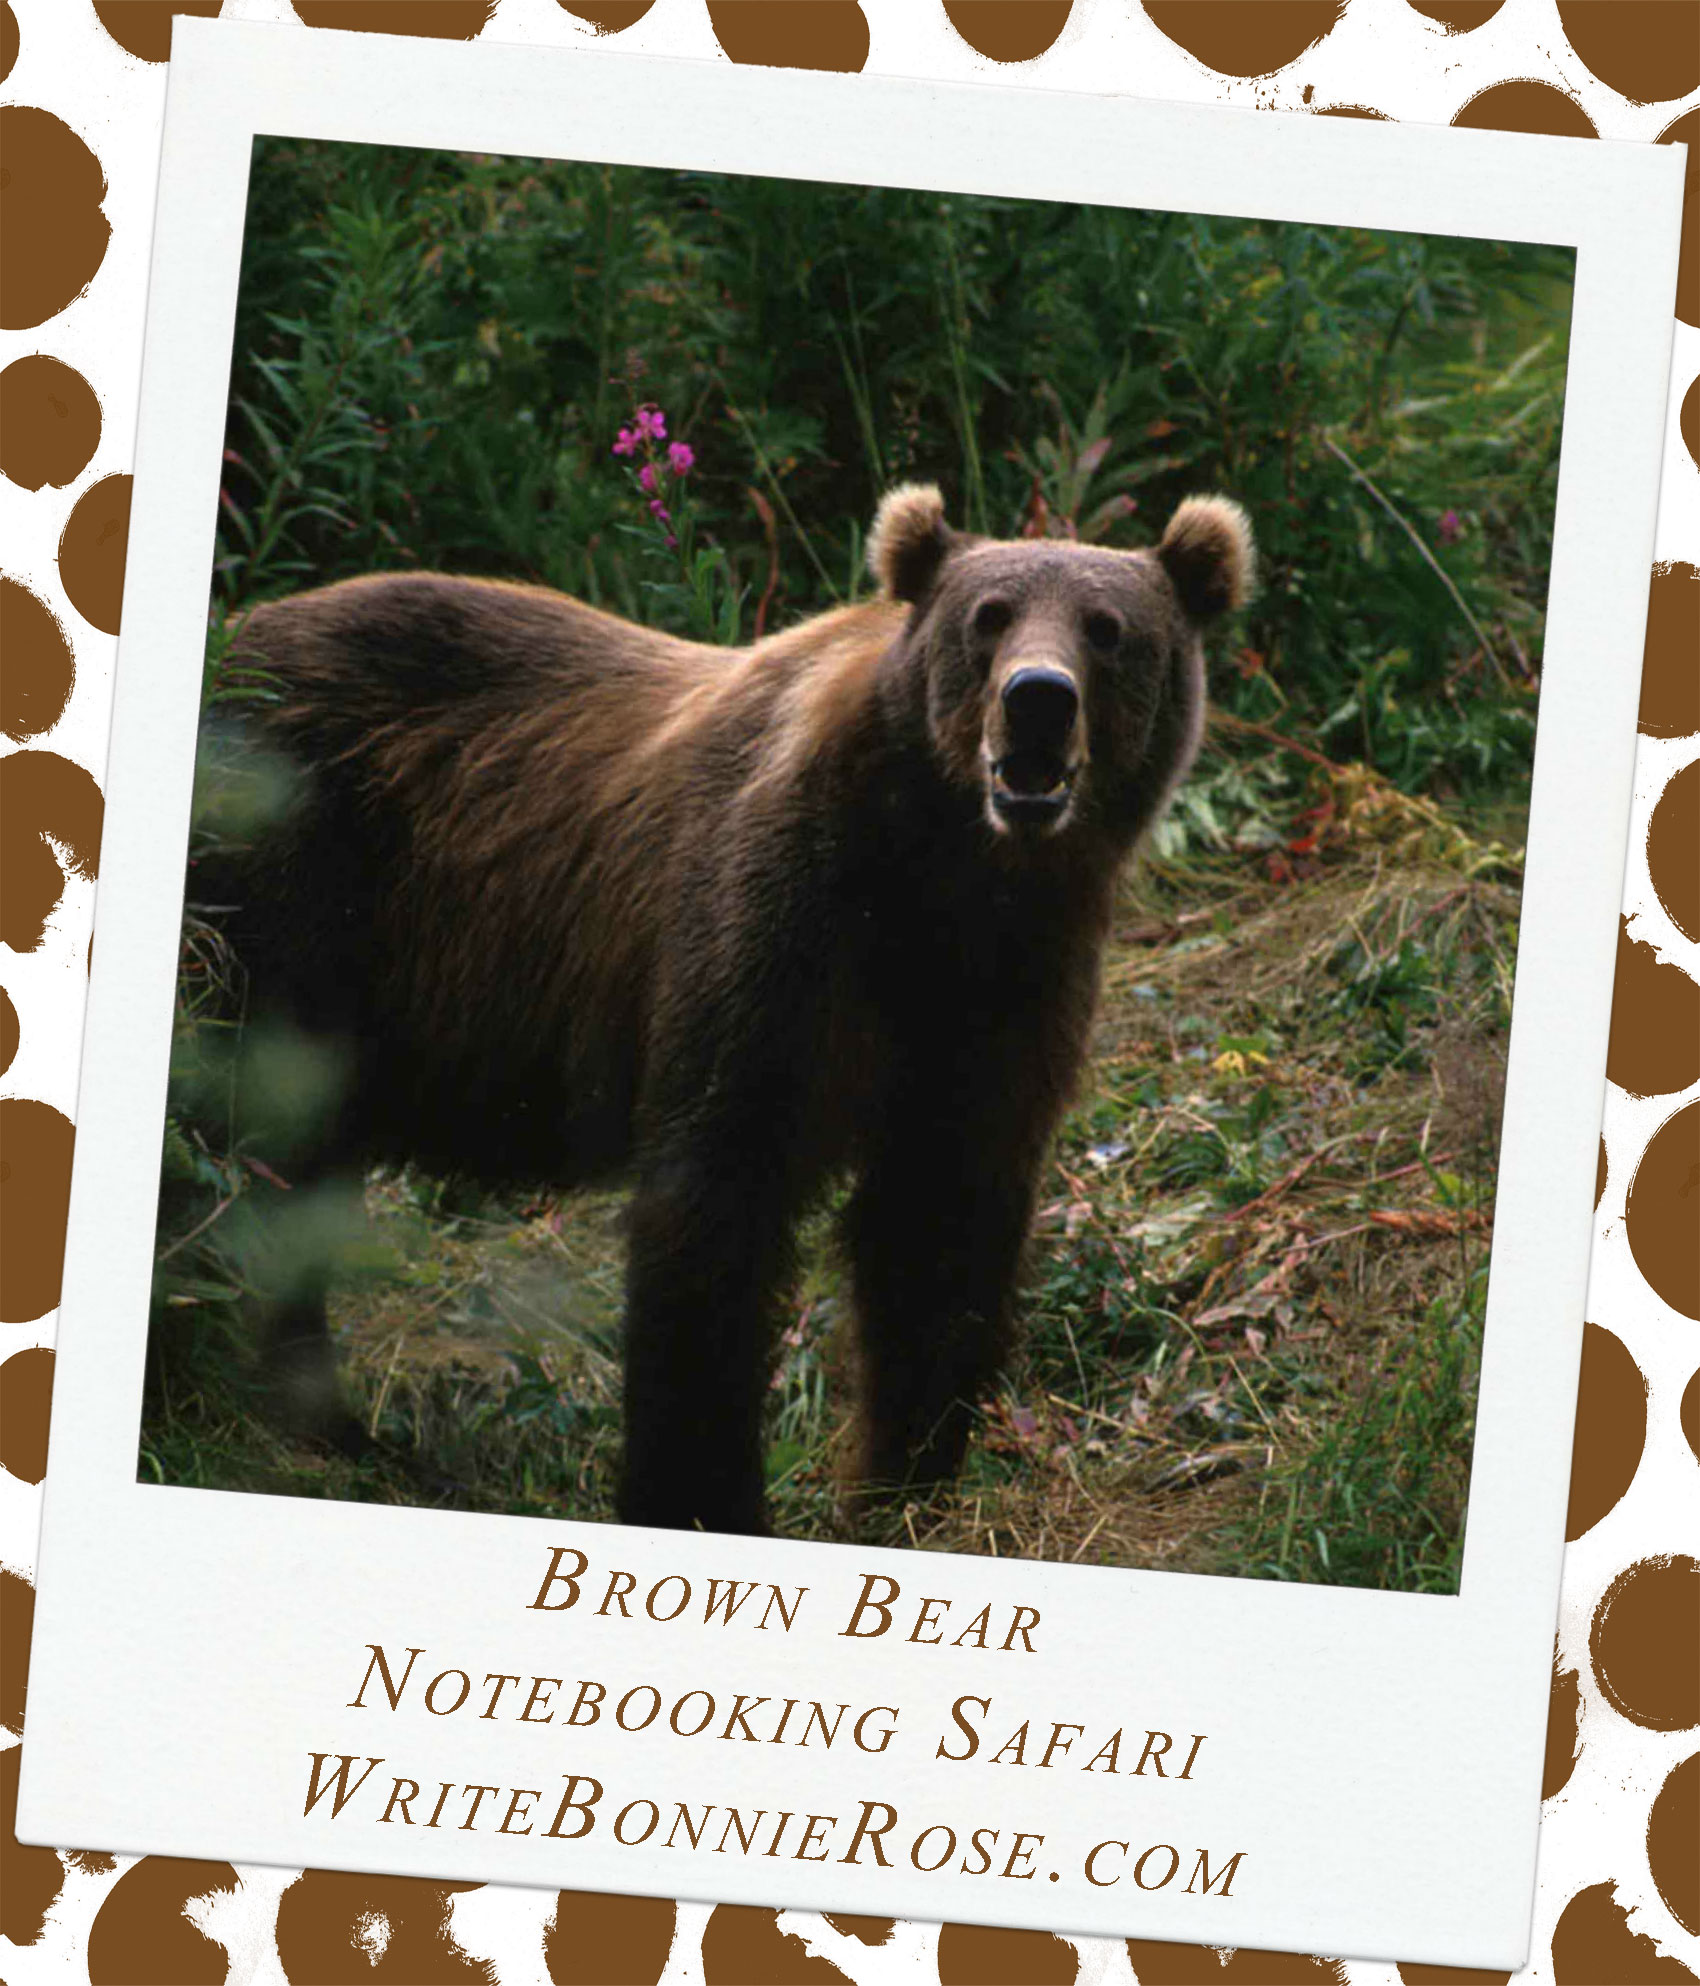 Notebooking Safari – Russia and the Brown Bear